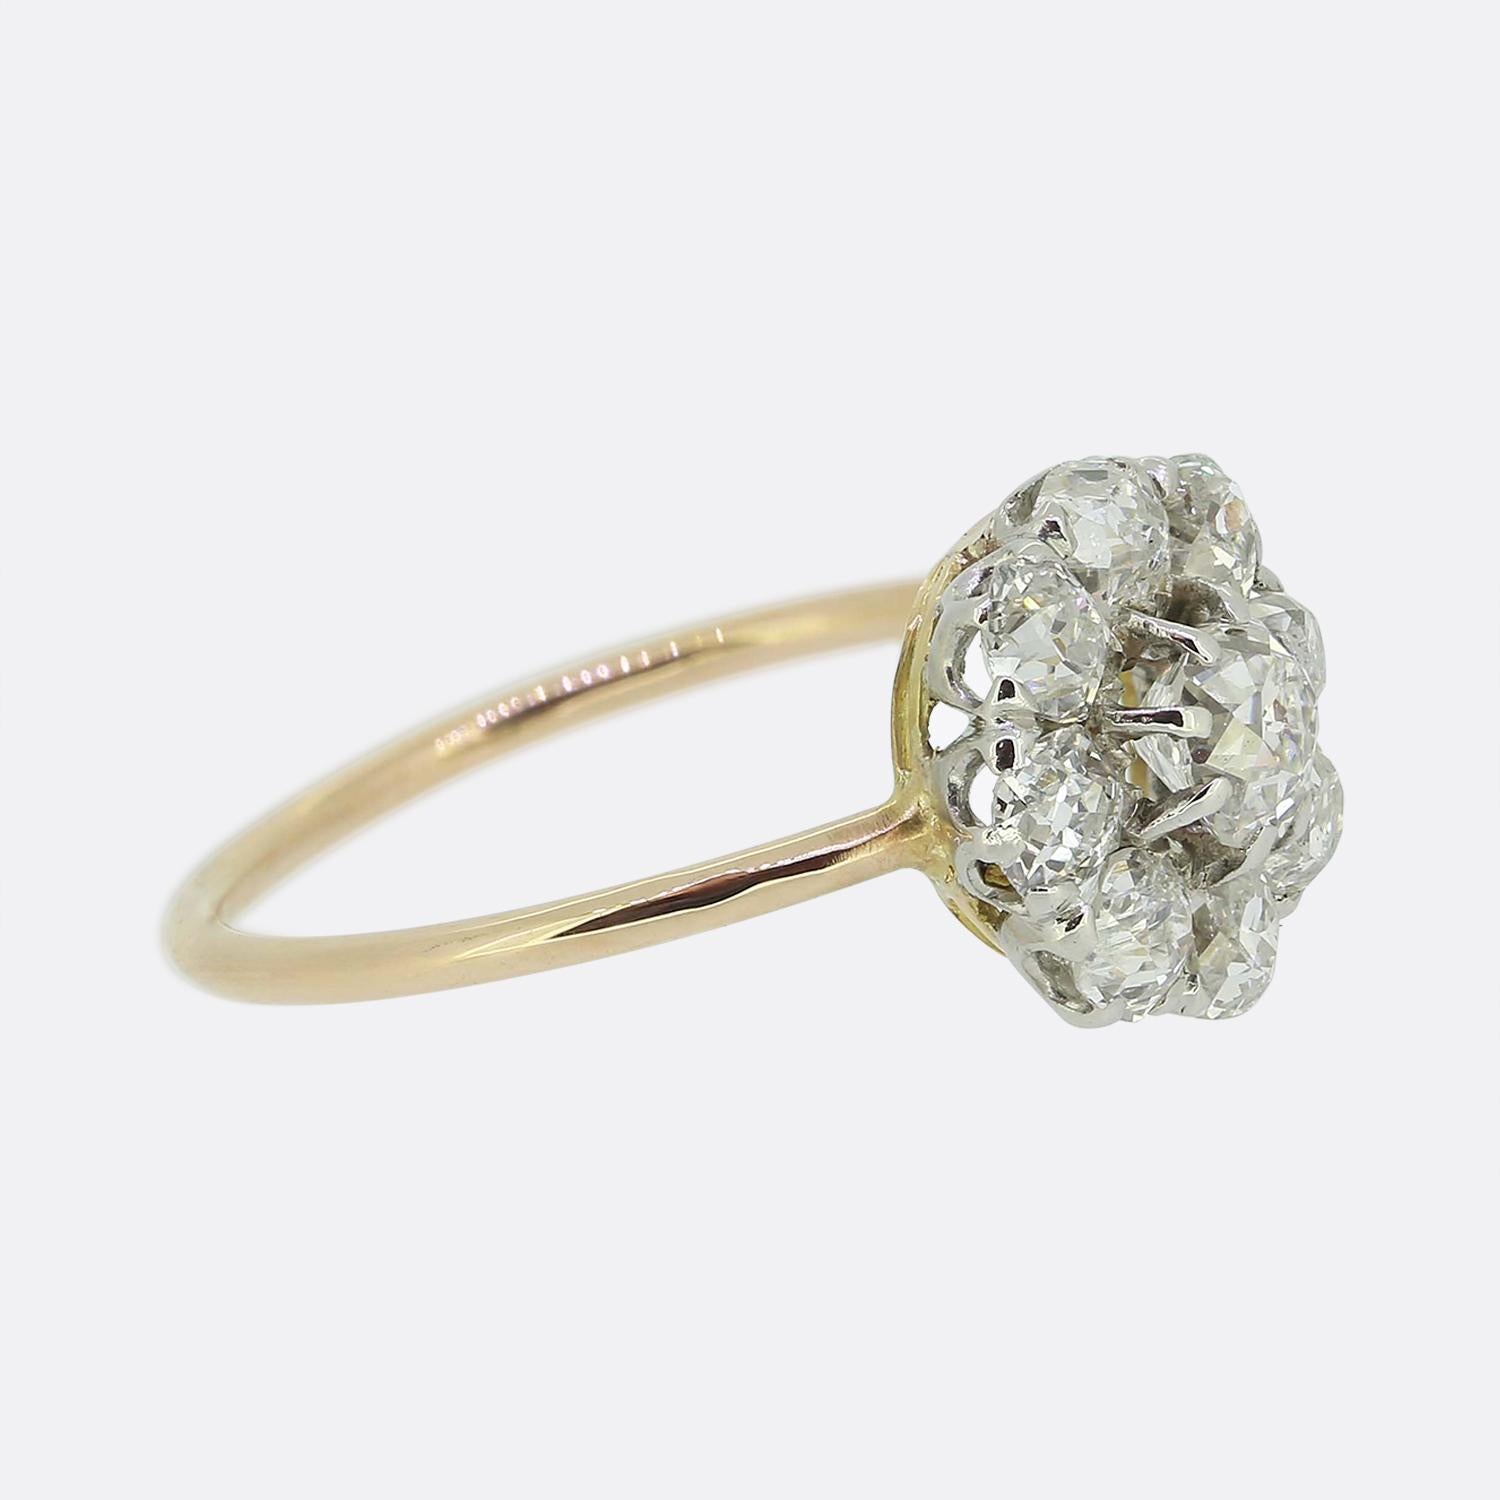 Here we have a splendid diamond cluster ring. This elegant piece showcases a cluster of bright white chunky old mine cut diamond with the largest sitting slightly risen at the centre of the face. The remaining slightly smaller matching stones